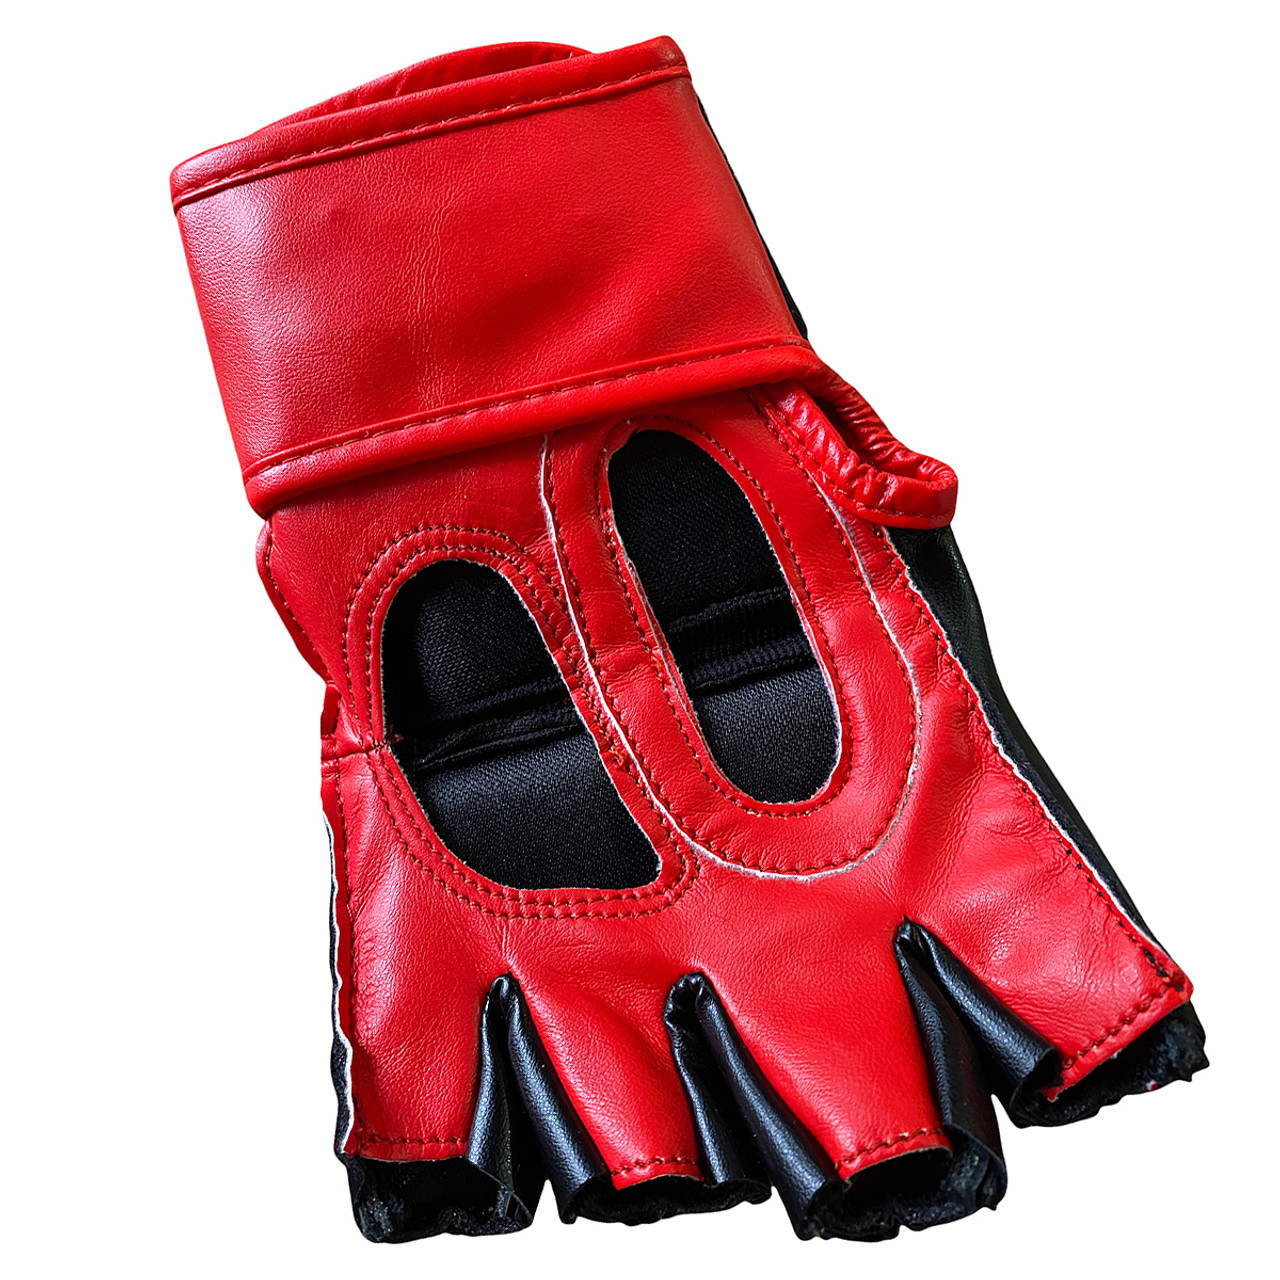 Grapping adidas MMA/Kickboxing/Workout Training Mitts